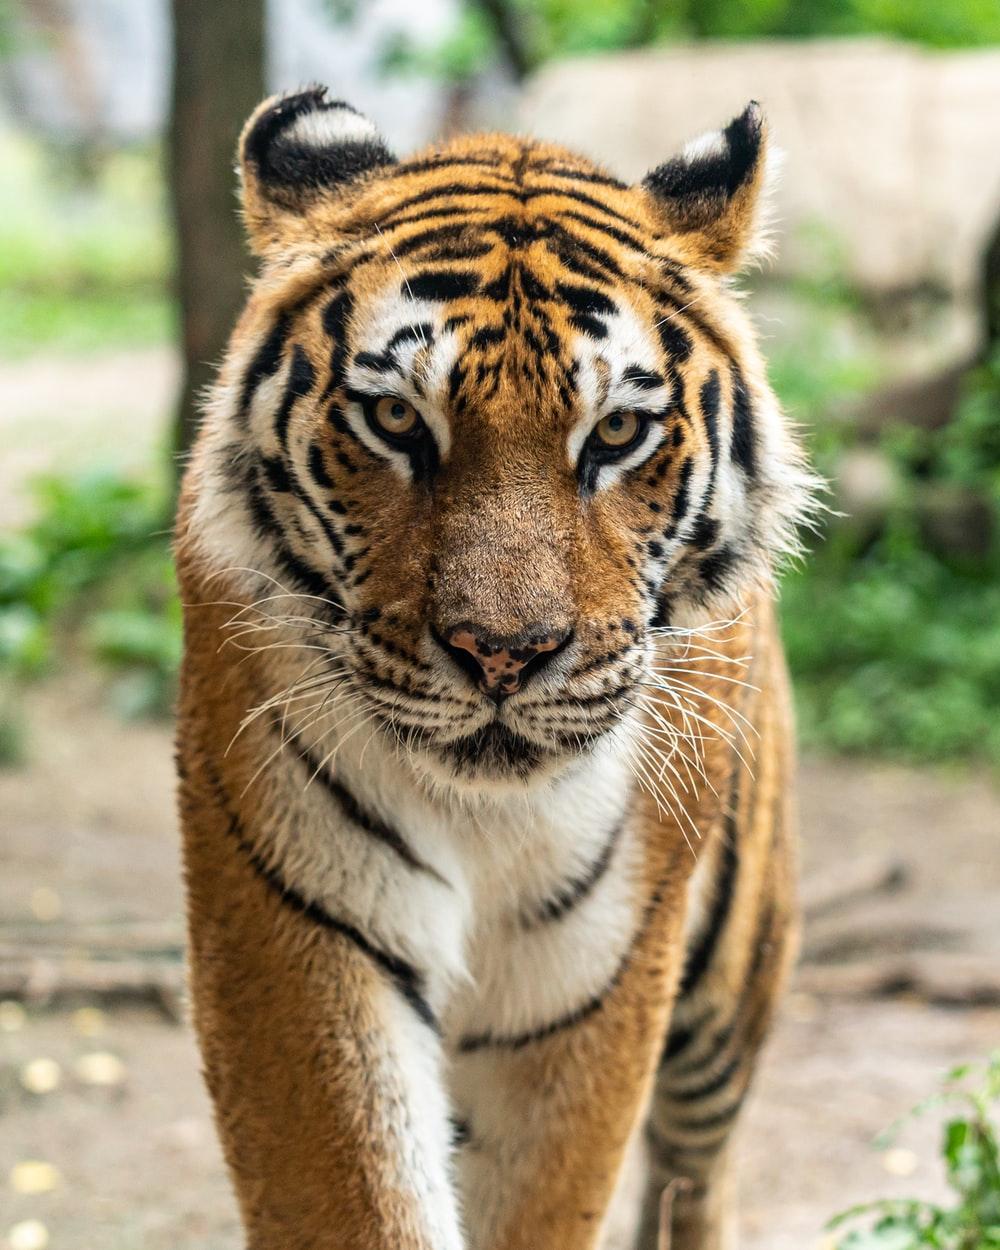 Tiger Image: Download HD Picture & Photo